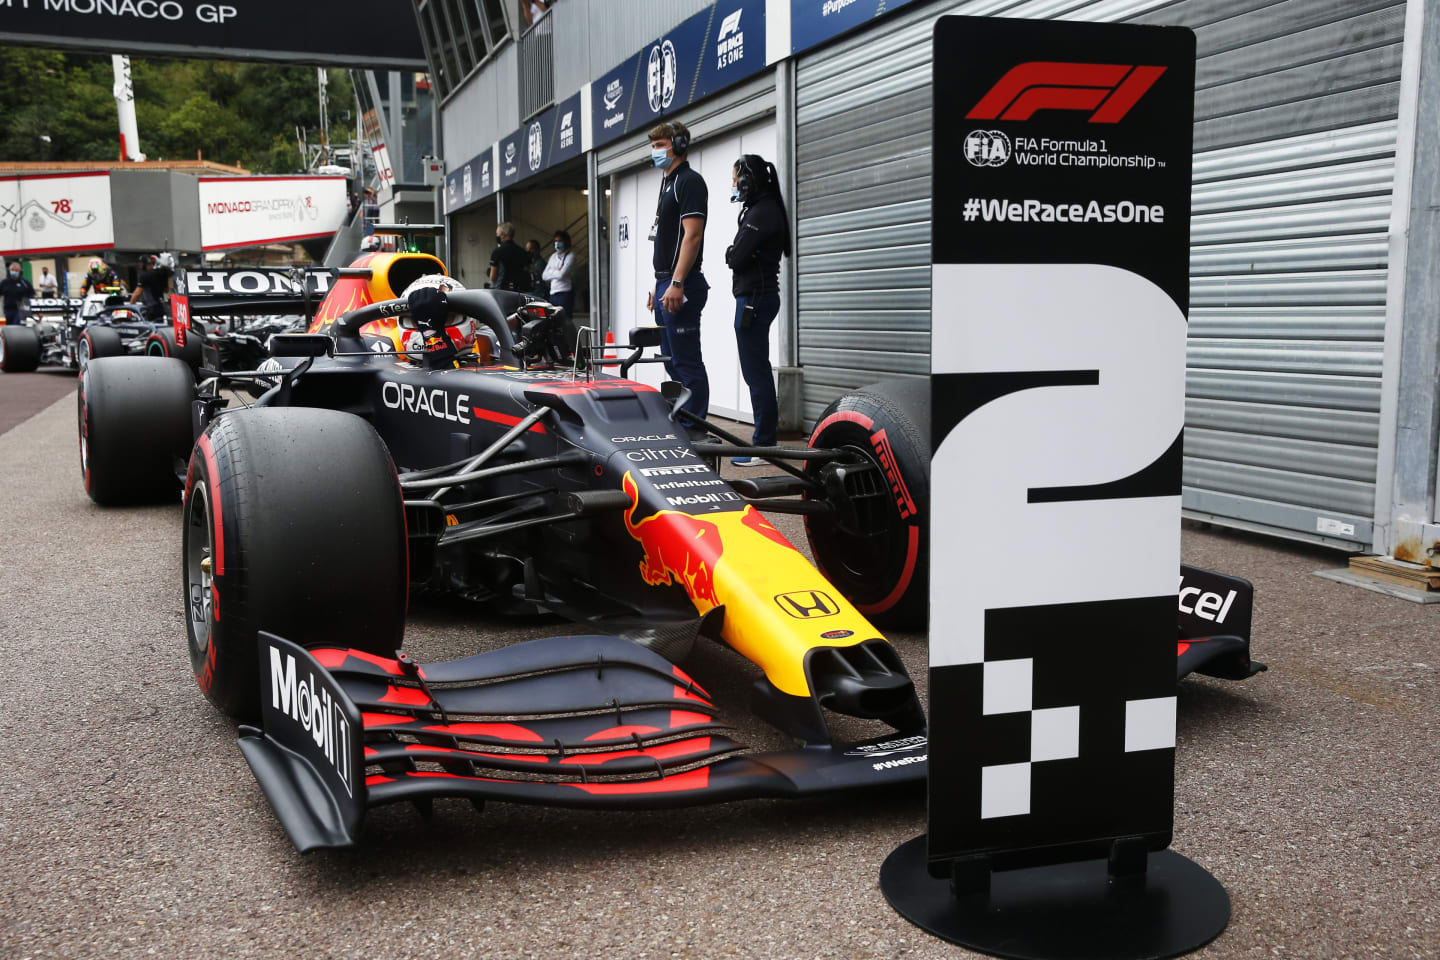 MONTE-CARLO, MONACO - MAY 22: Second placed qualifier Max Verstappen of Netherlands and Red Bull